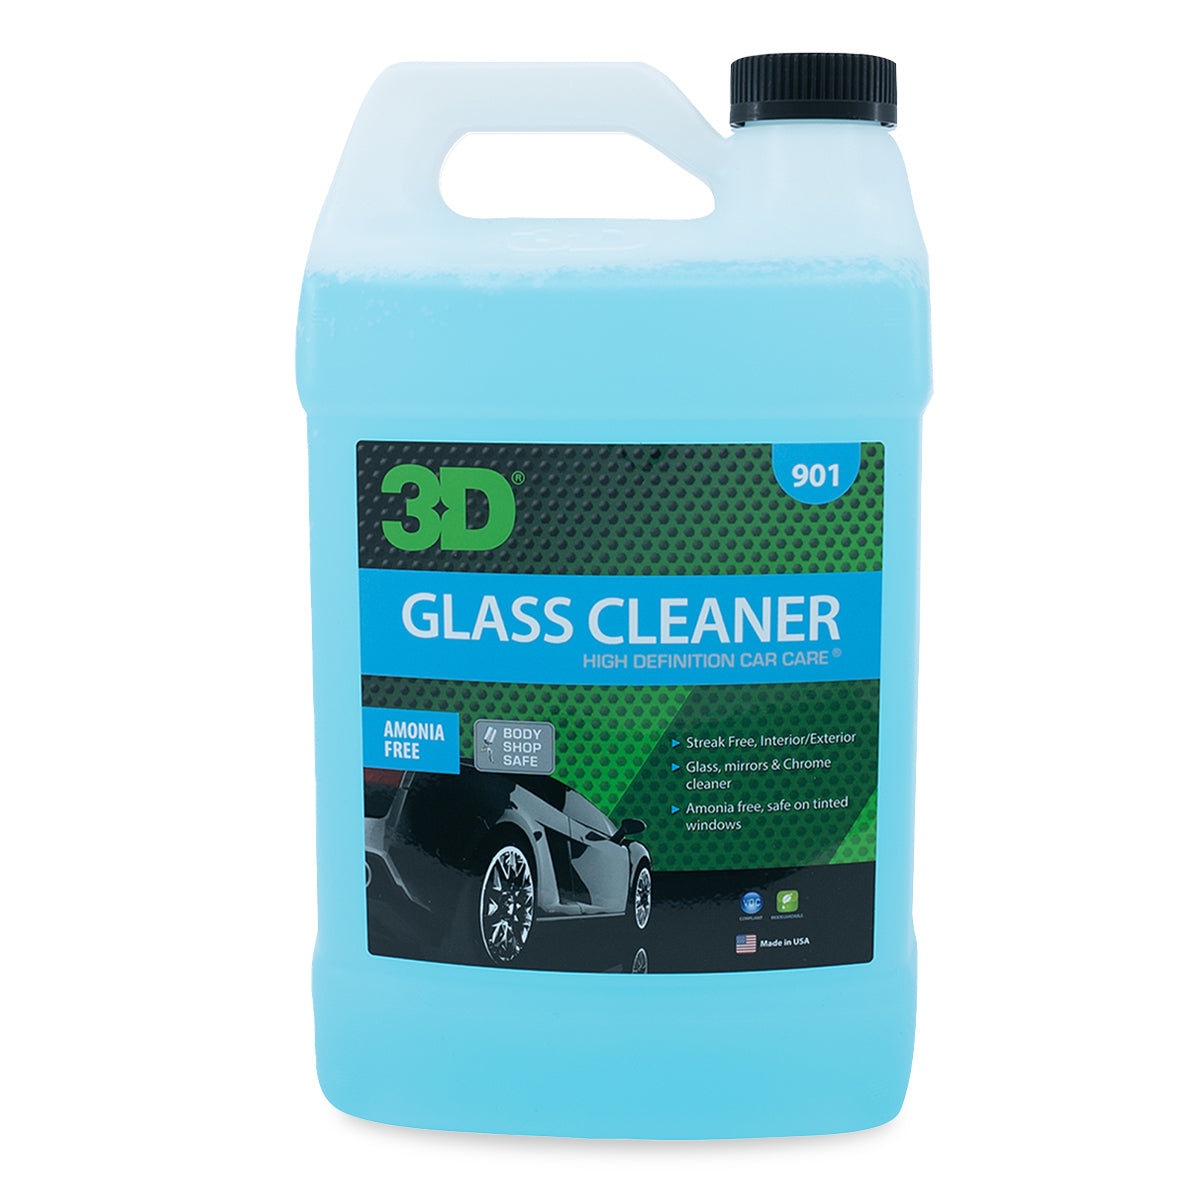 Generic Car Glass Cleaner with Sponge, Car Glass Oil Film Cleaner, Glass  Cleaner for Auto and Home Eliminates Coatings, Bird Droppings